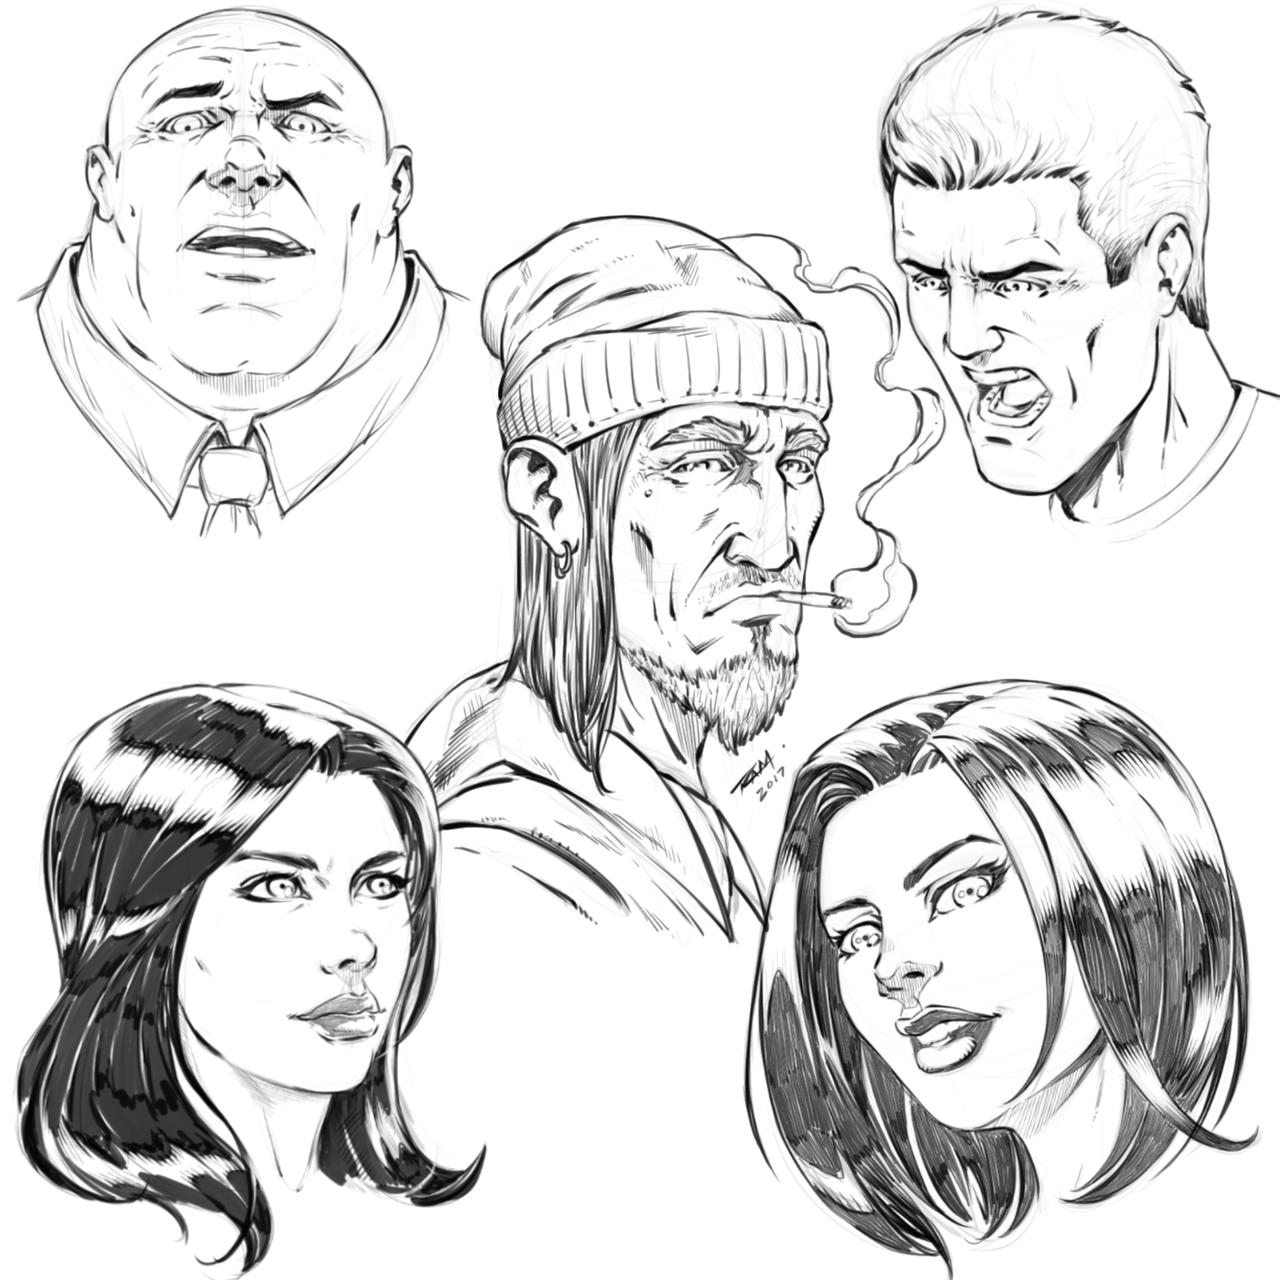 Sketches of Comic Book Style Faces by robertmarzullo on